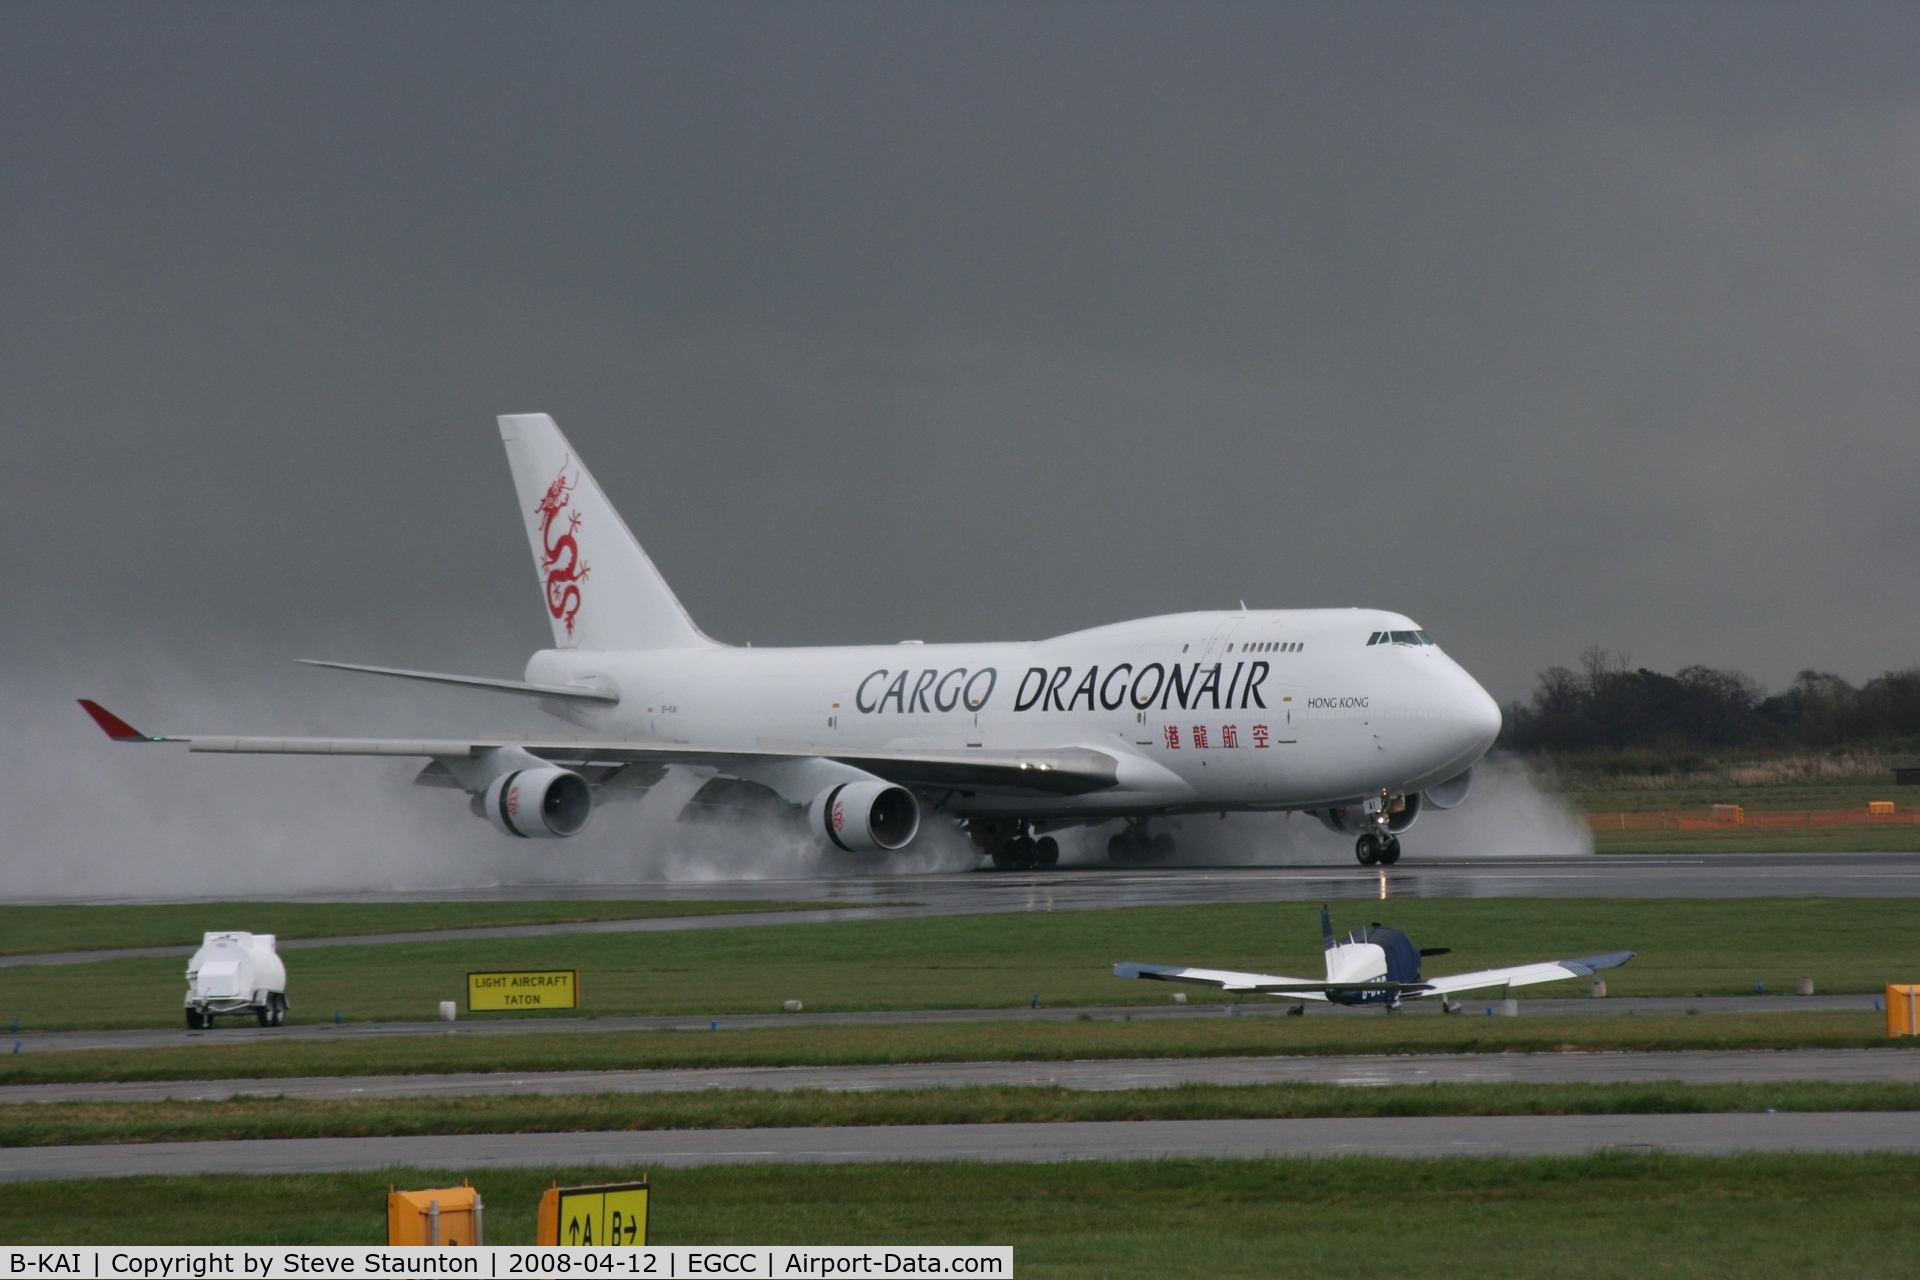 B-KAI, 1994 Boeing 747-412 C/N 27217, Taken at Manchester Airport on a typical showery April day